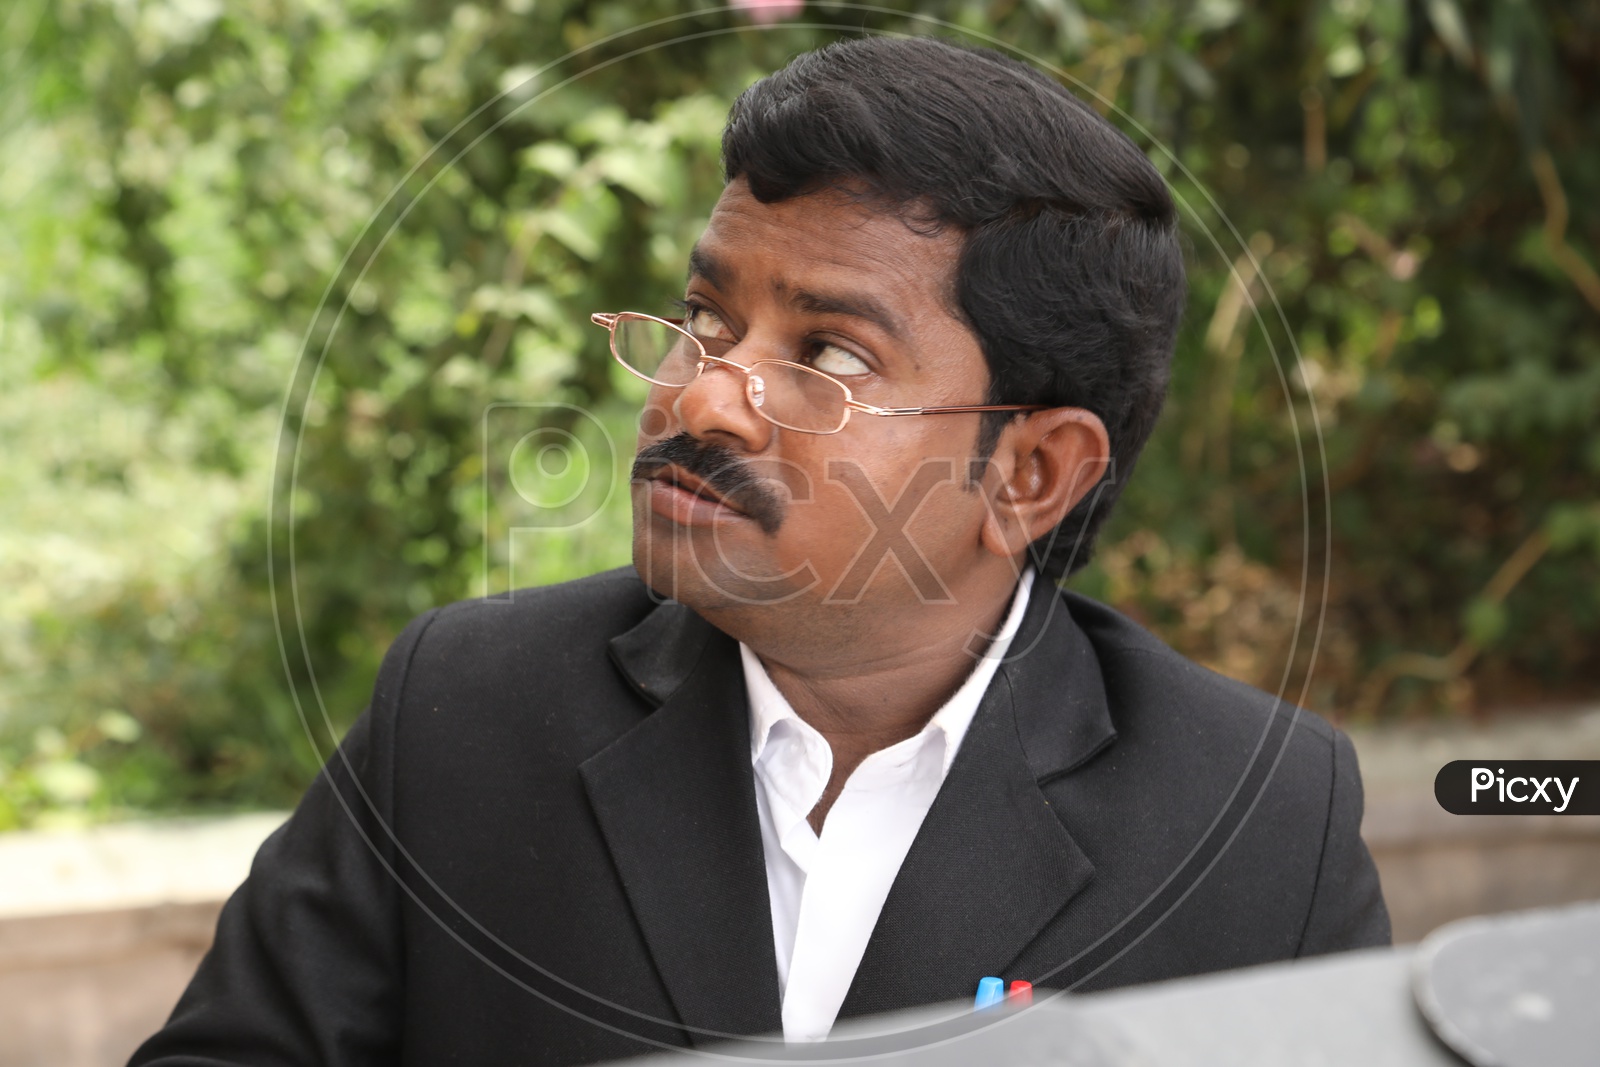 An Actor In Lawyer Getup At a Movie Shooting